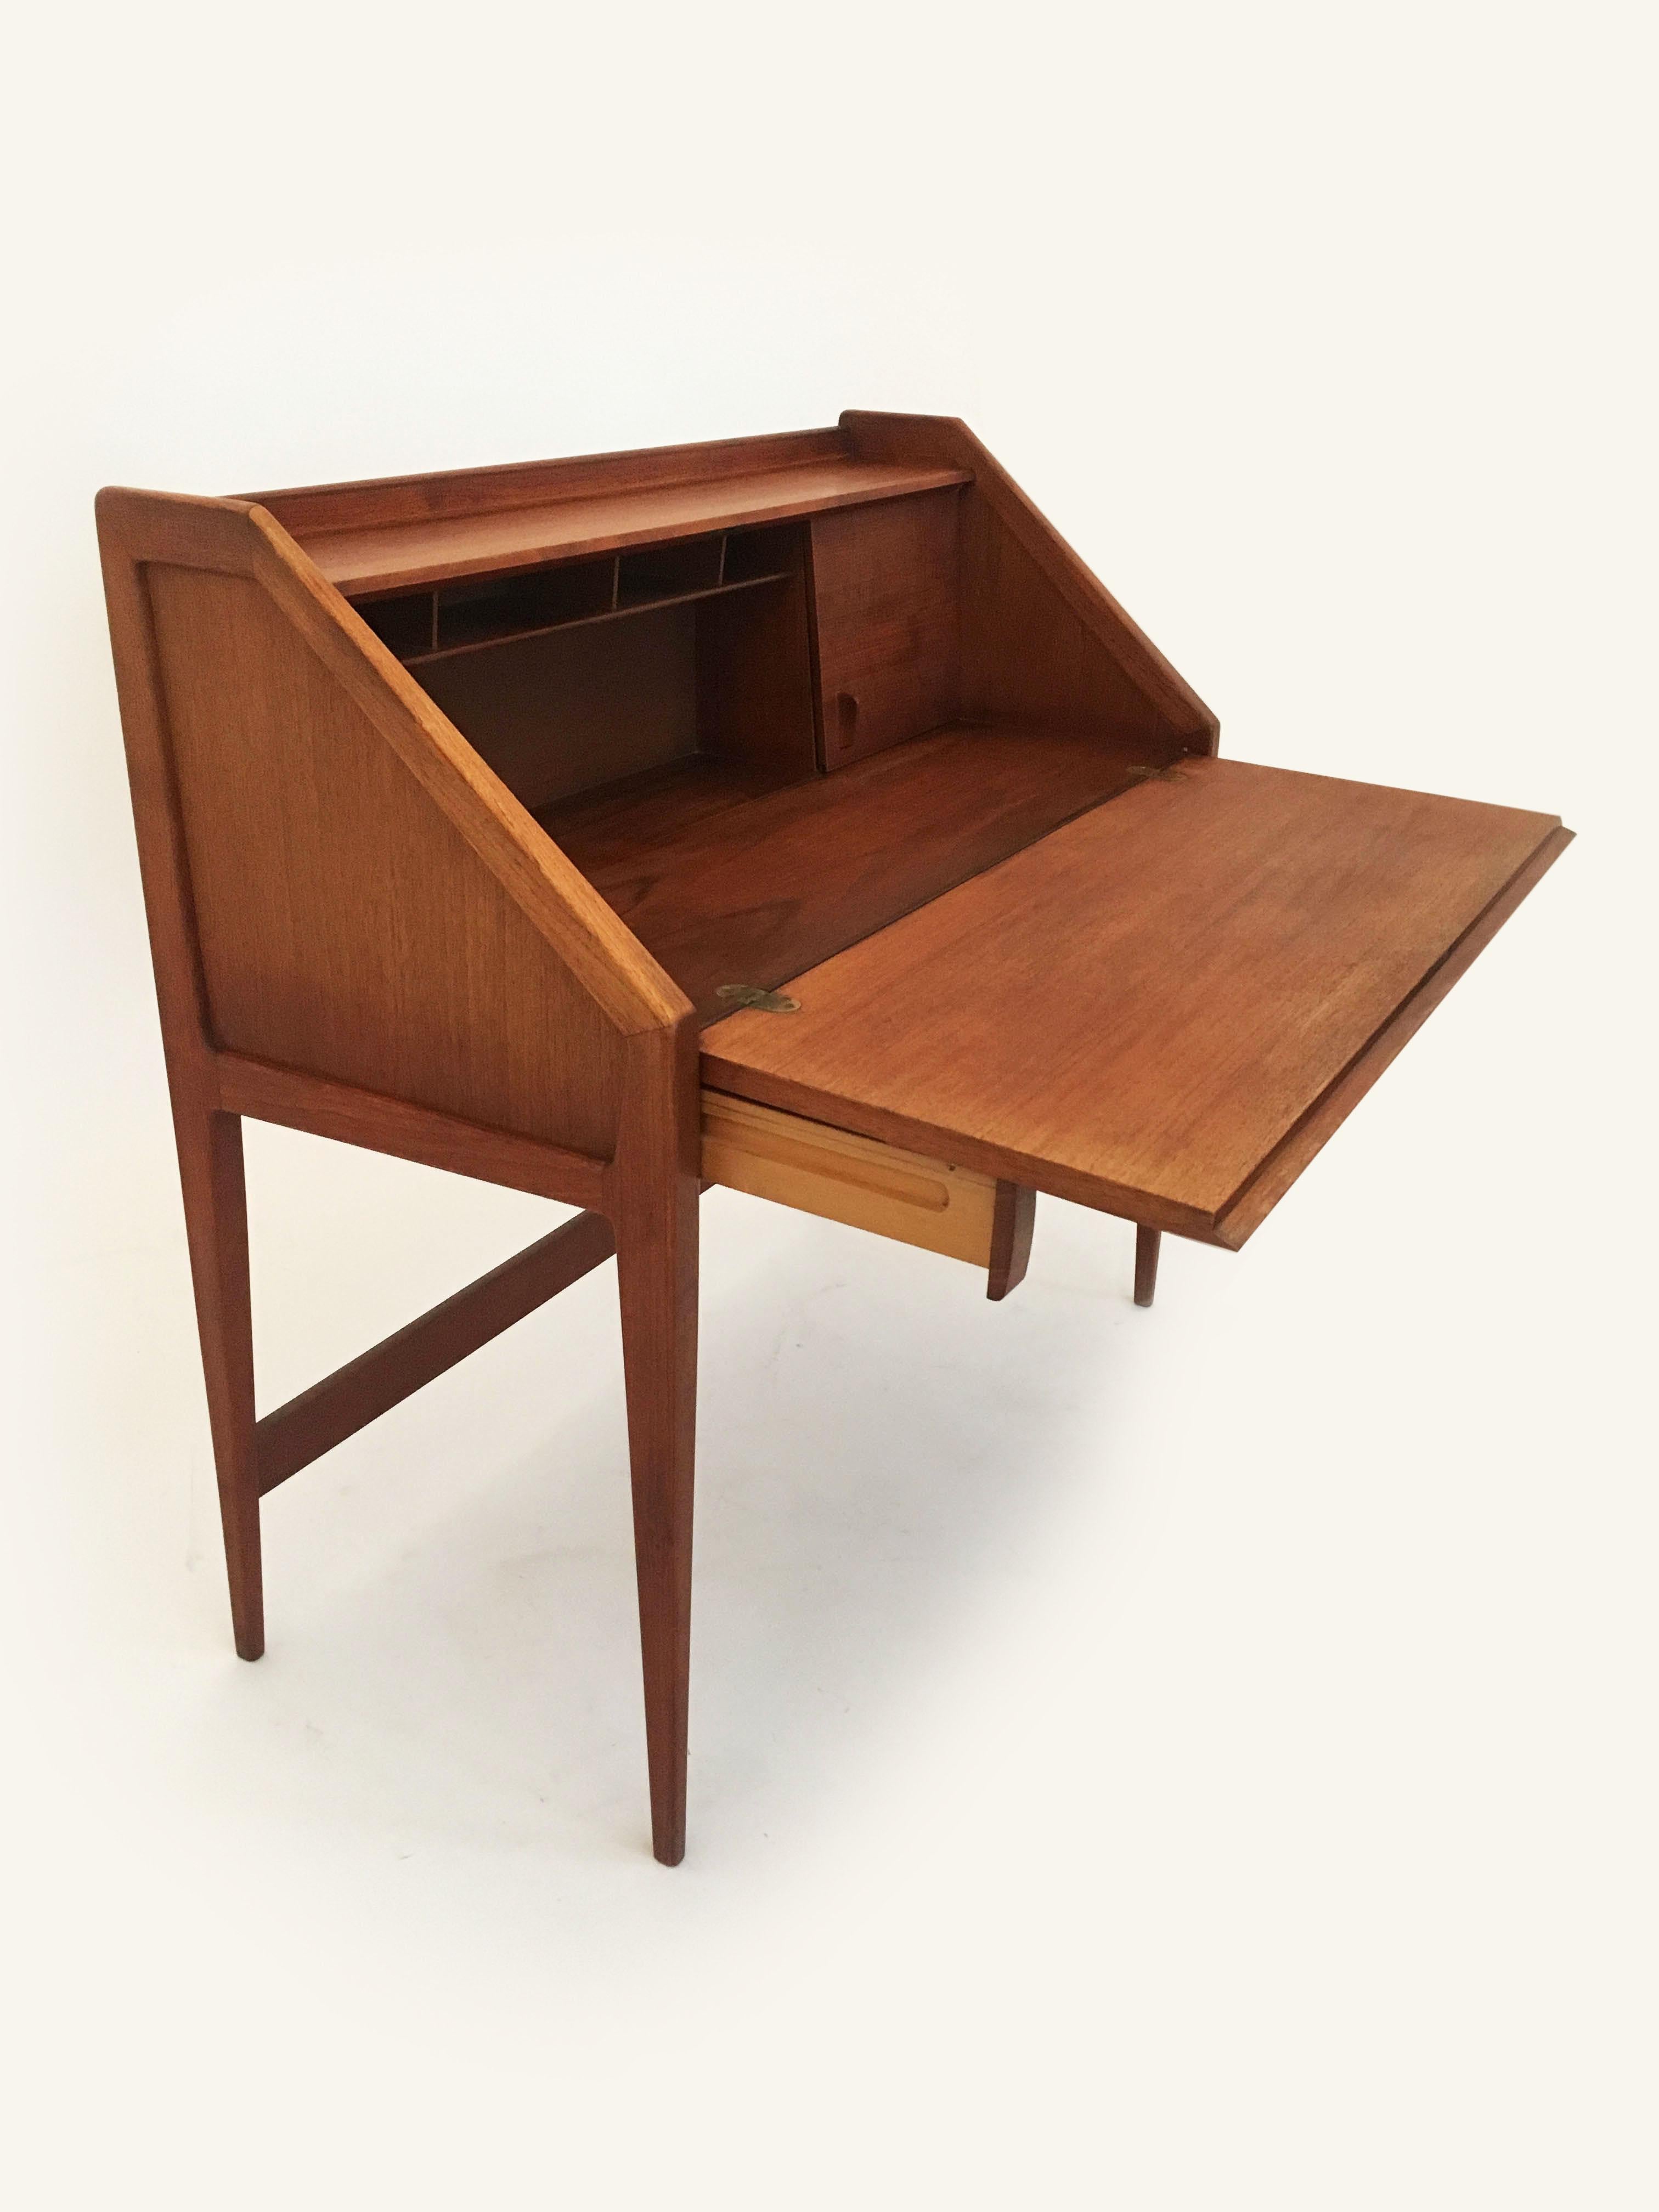 Mid-Century Modern Teak Desk, Writing Table by Walter Wirz for Wilhelm Renz In Good Condition For Sale In Vienna, AT